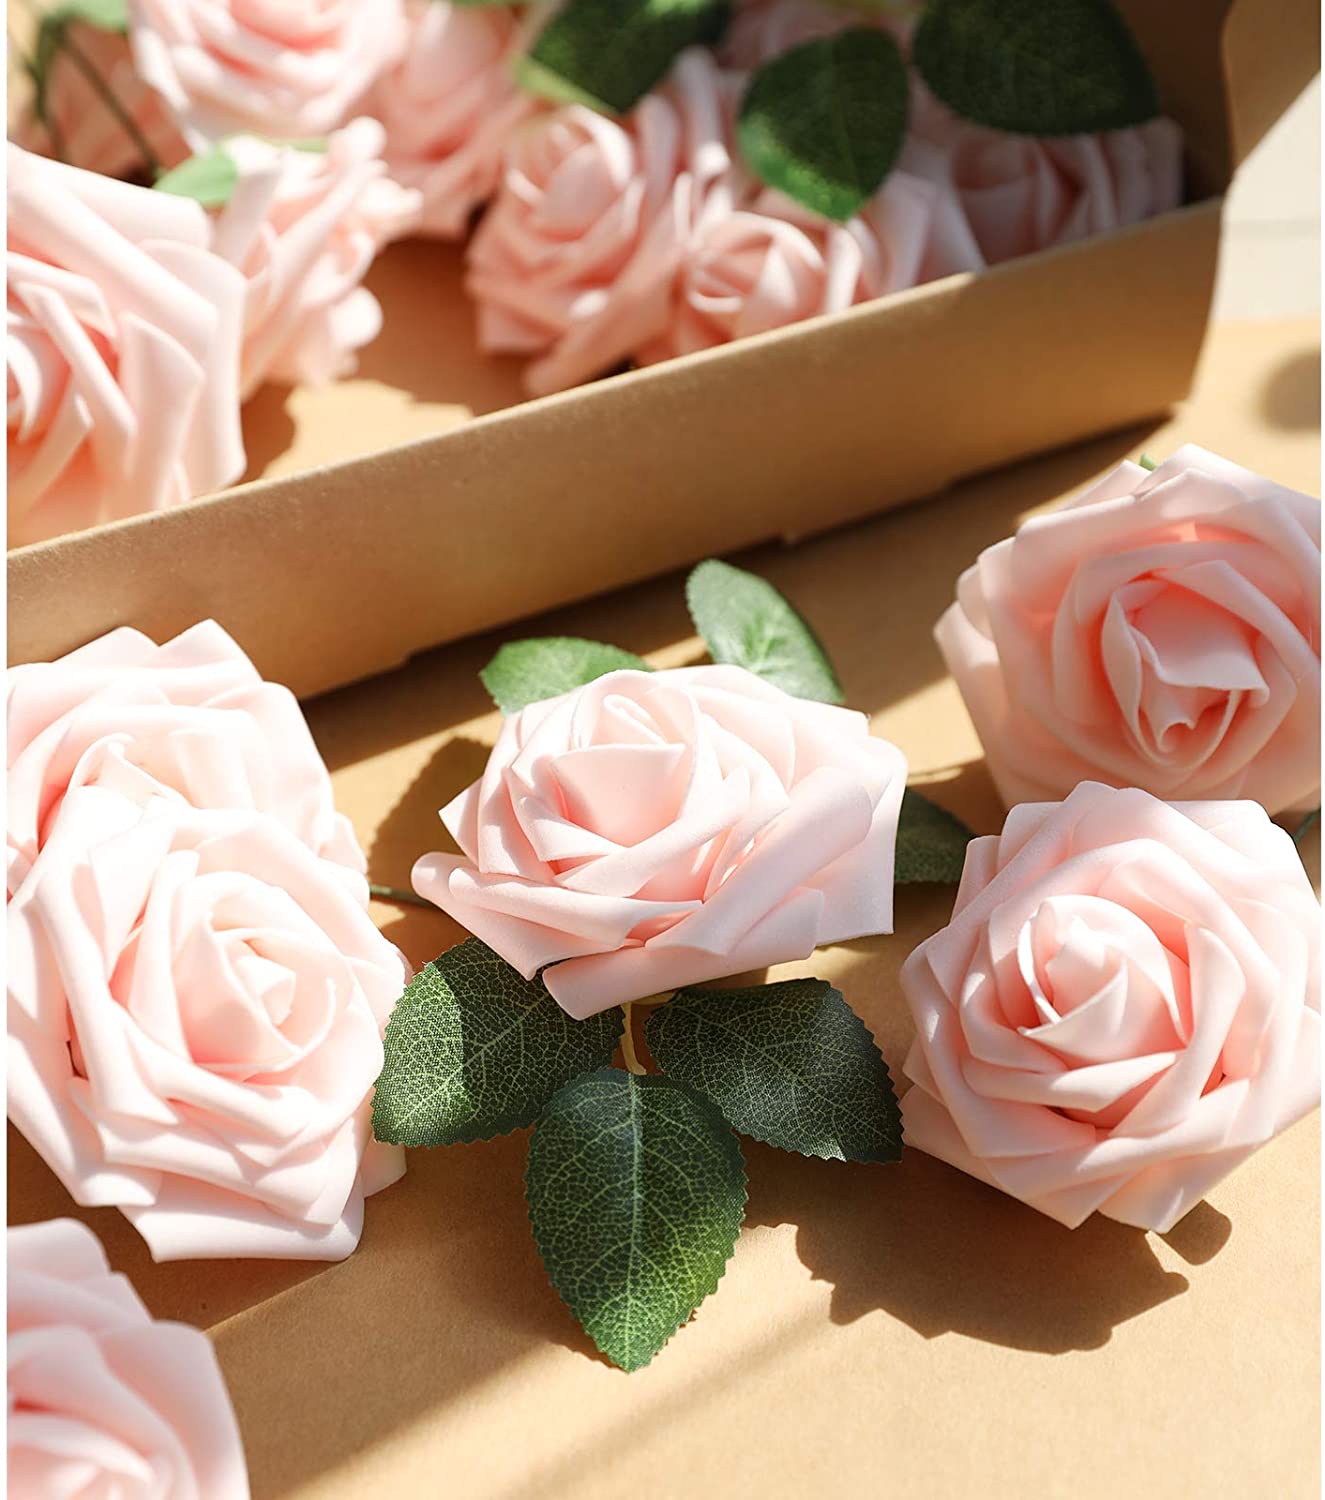 AmyHomie Artificial Flower Blush Pink Rose 25pcs Real Looking Fake